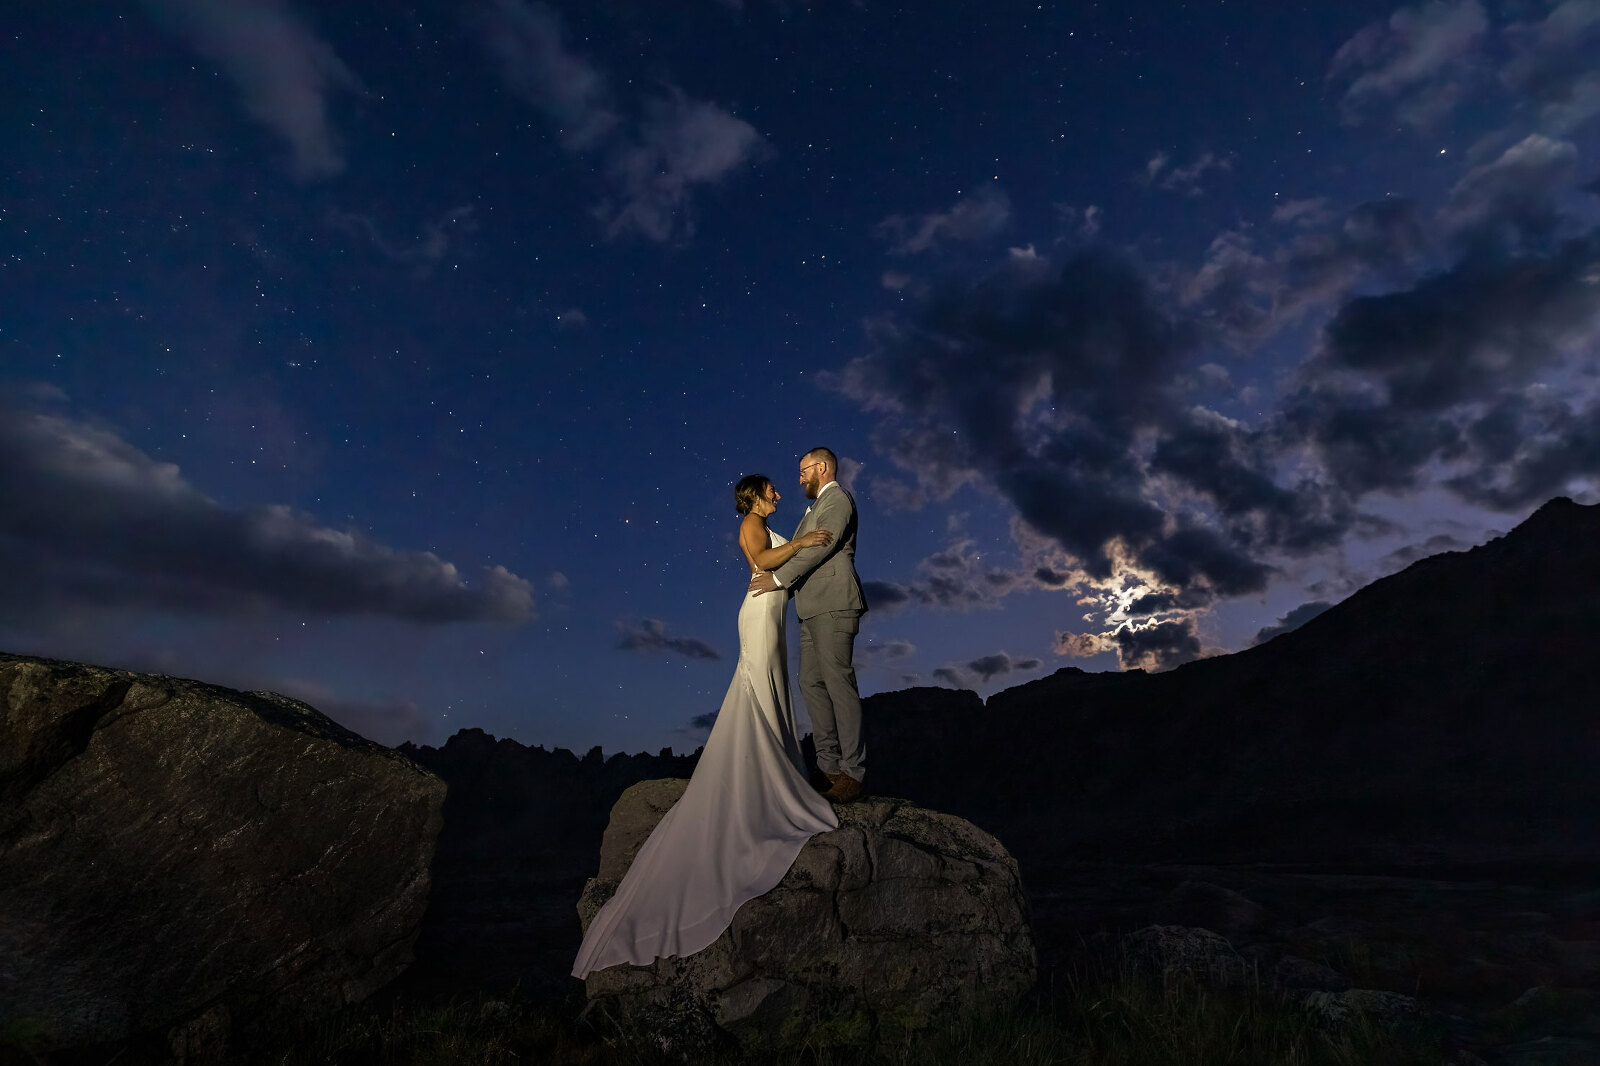 A wedding couple standing on mountain underneath the stars and moon.